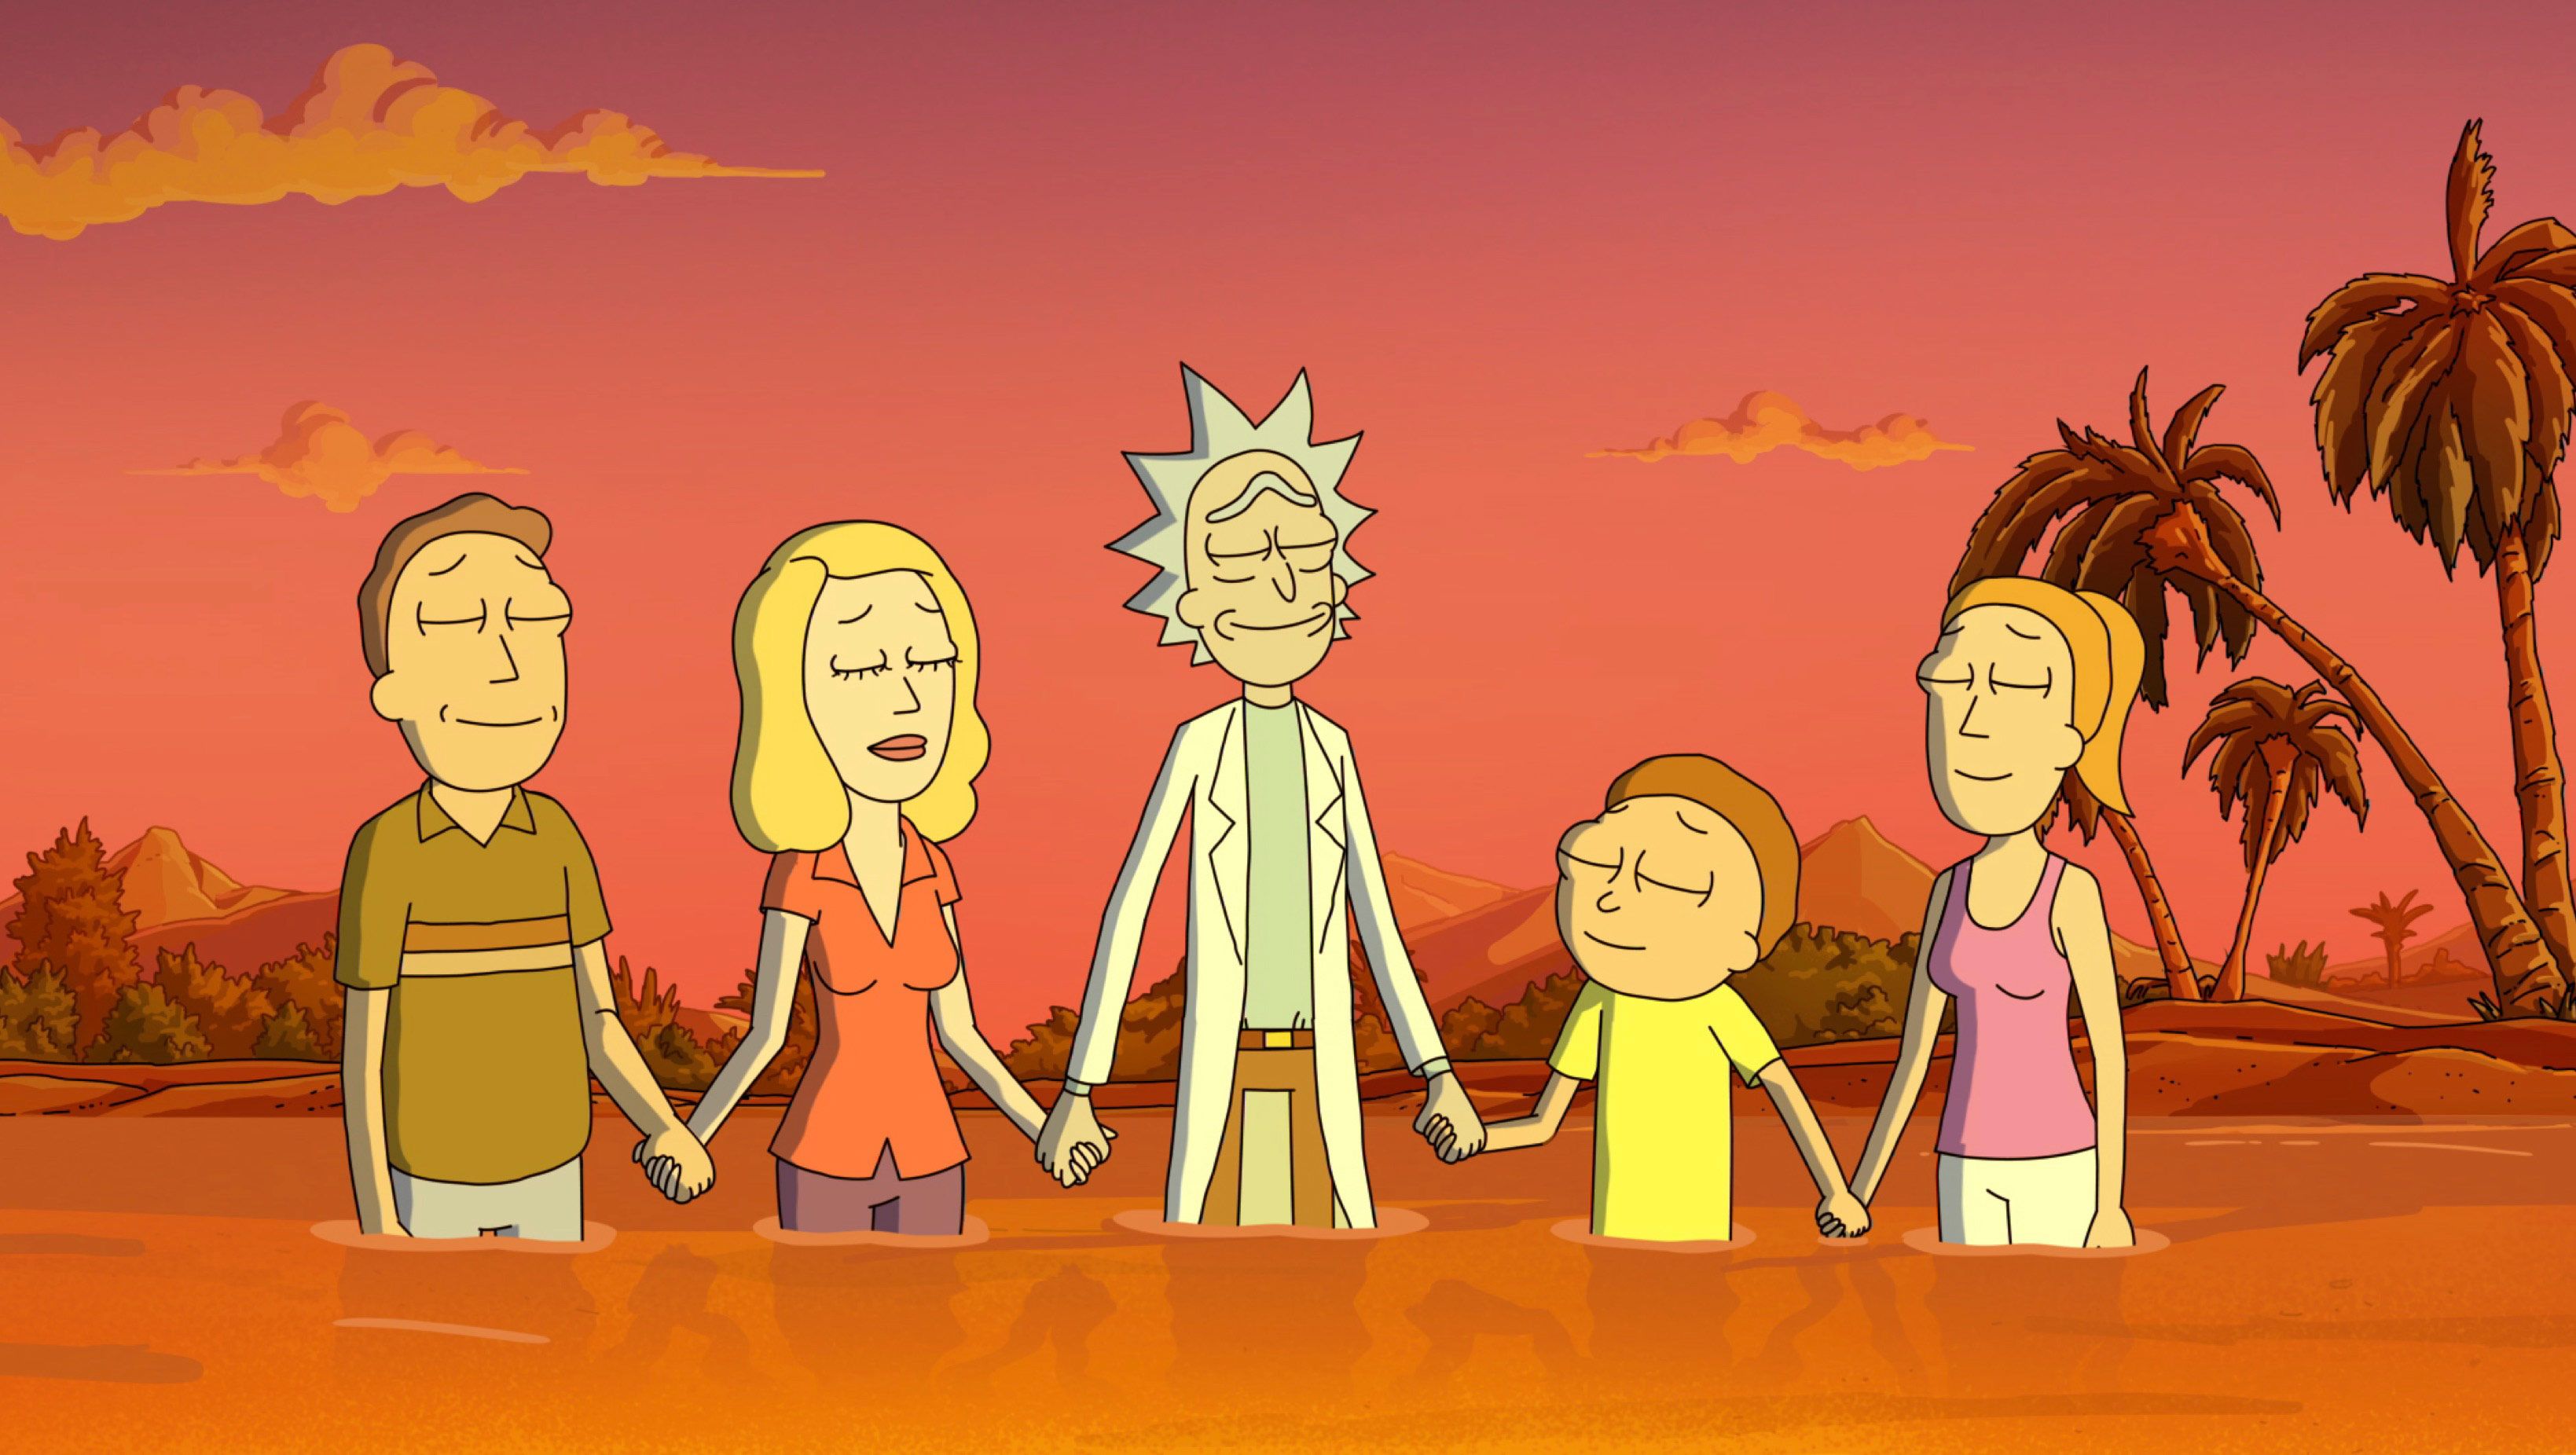 Rick and Morty season 6 release date, cast and more